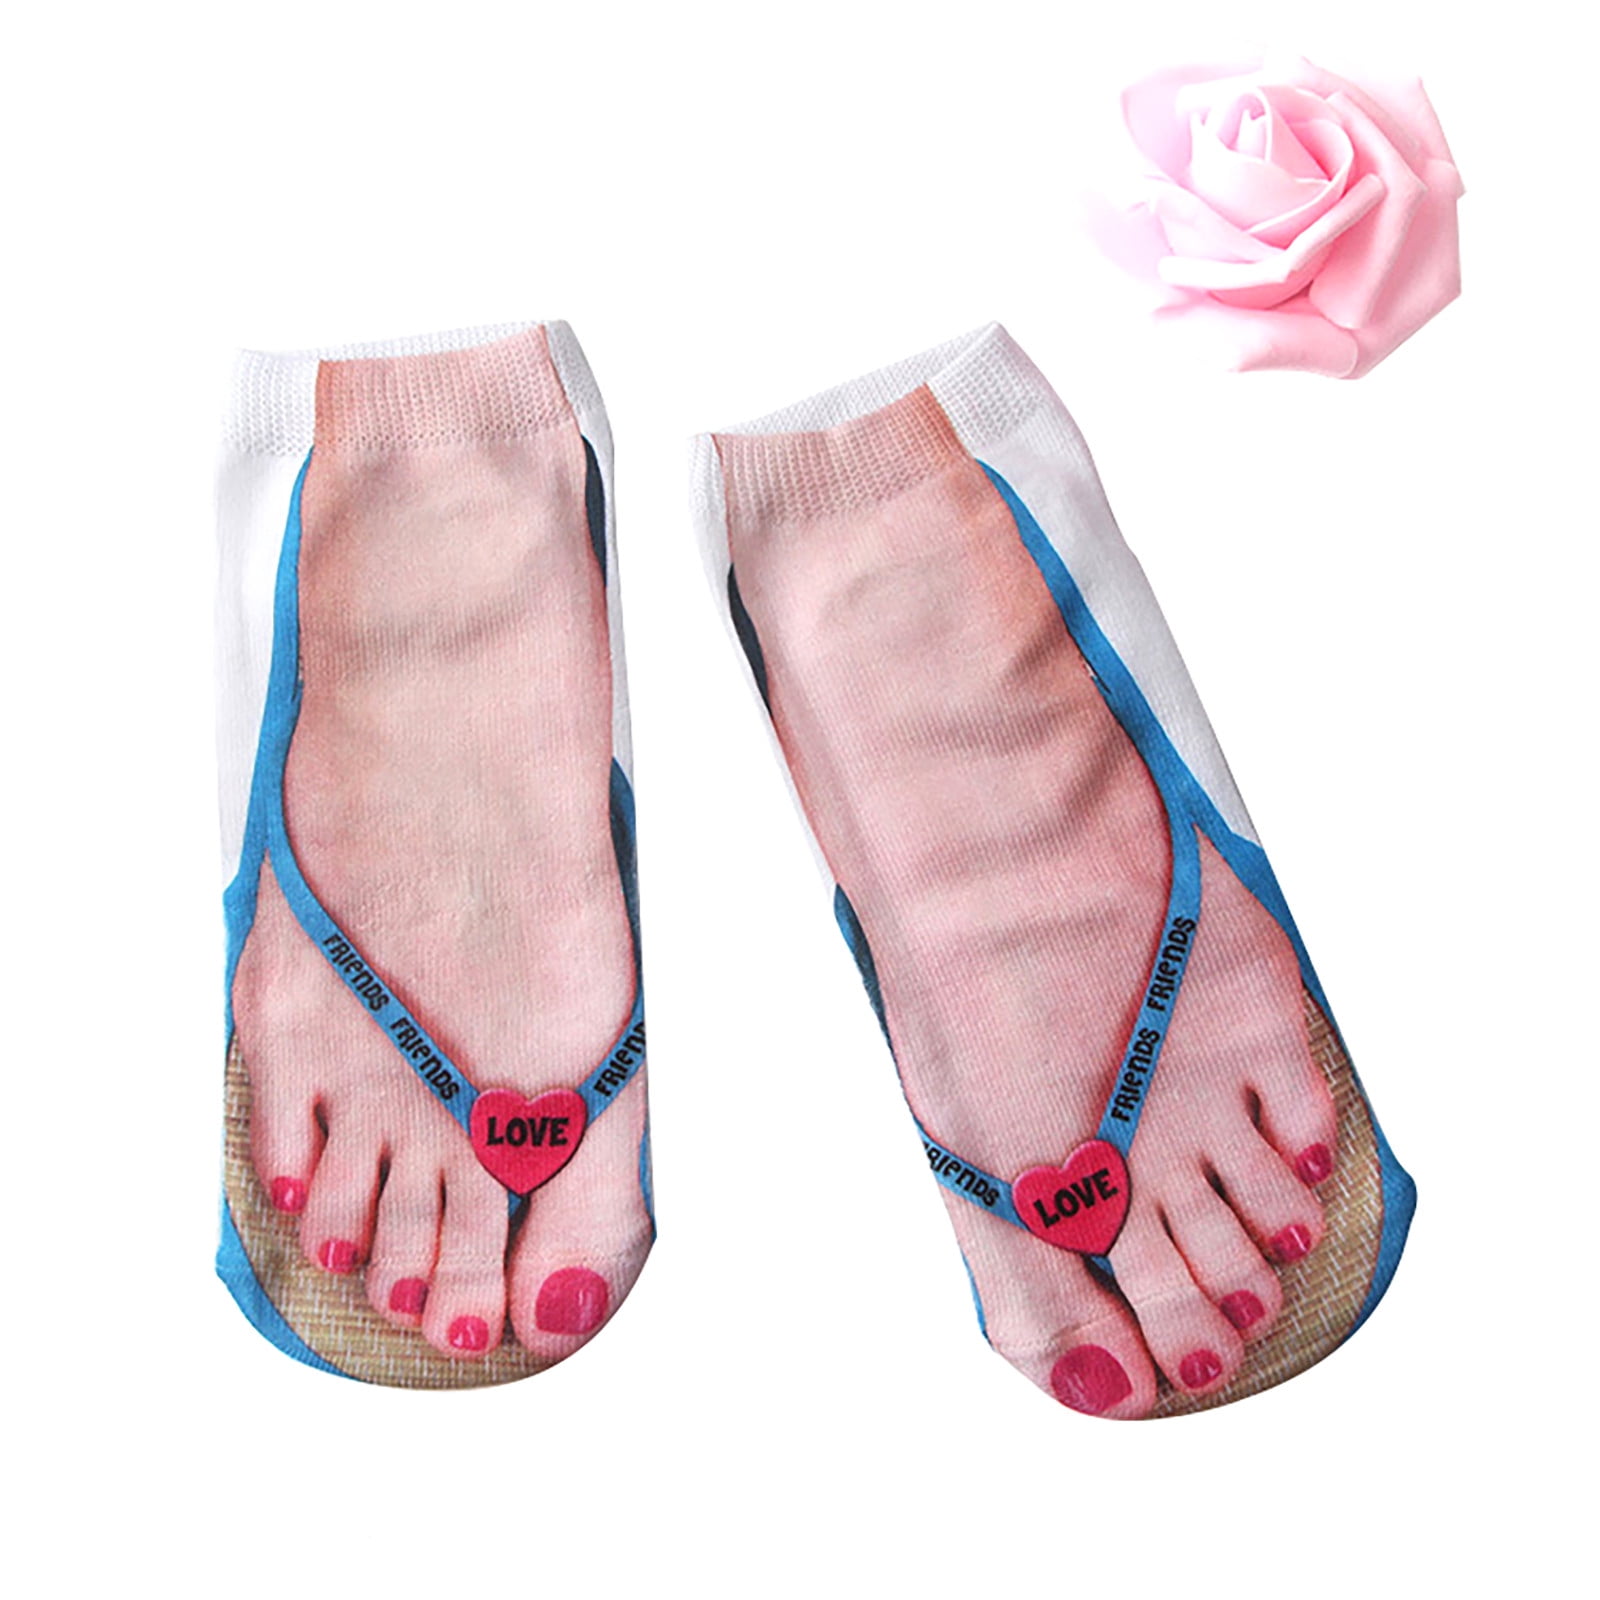 Funny Human Feet In Sandals Socks For People With Ugly Feet Gifts For  Friends 